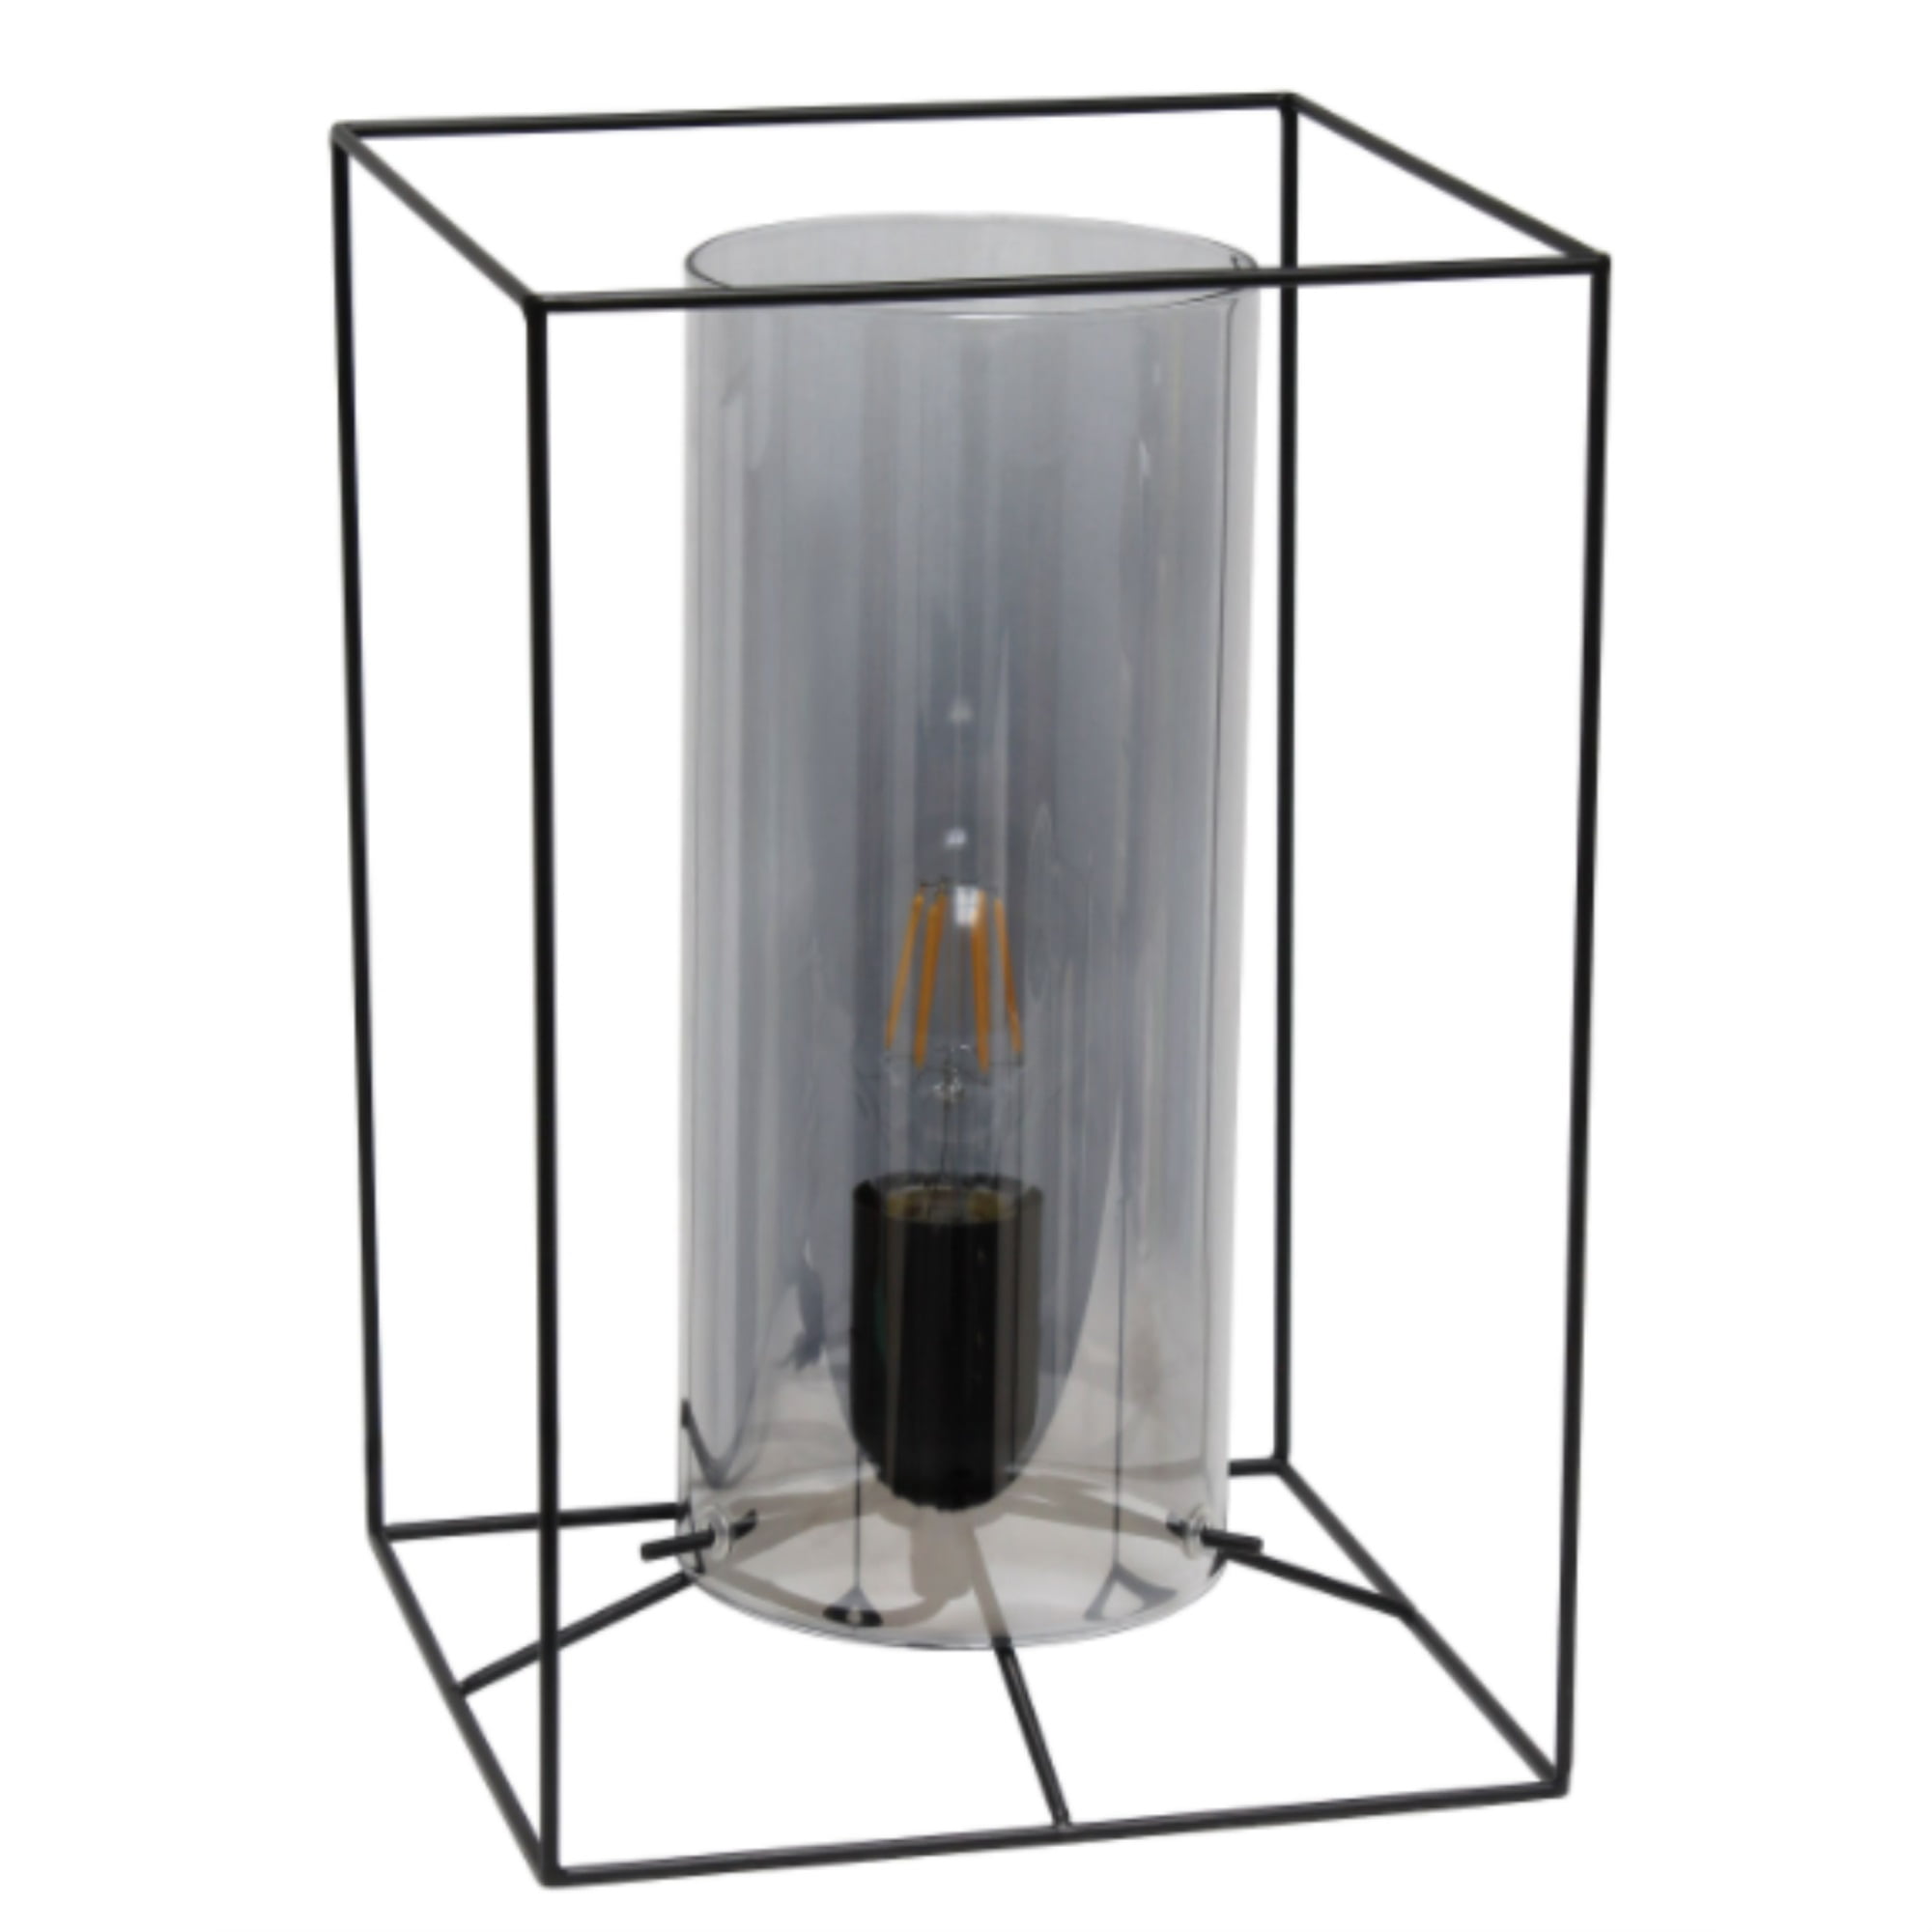  Lalia Home Black Framed Table Lamp with Smoked Cylinder Glass Shade, Large